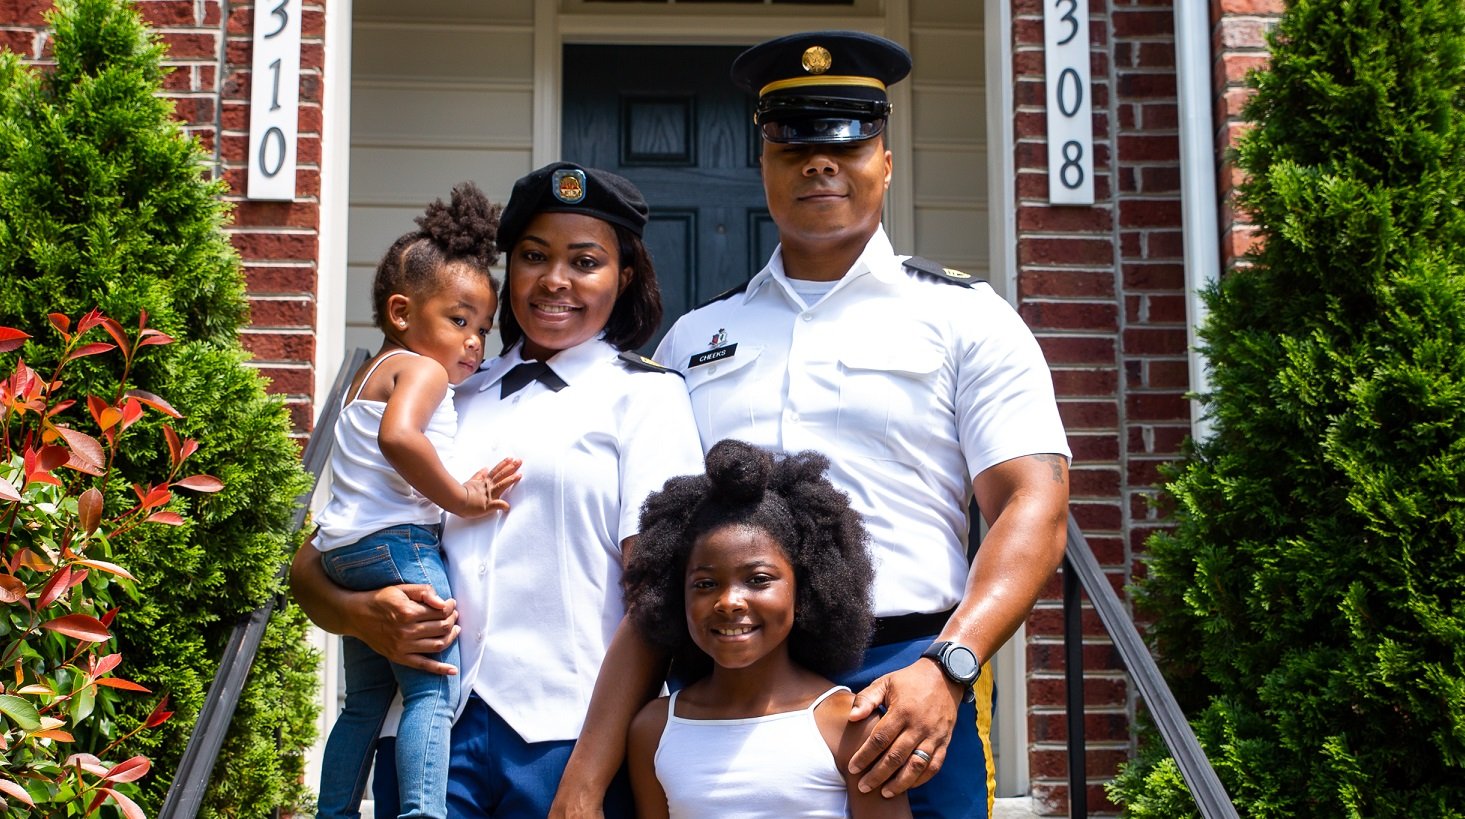 Military family standing in front of their home